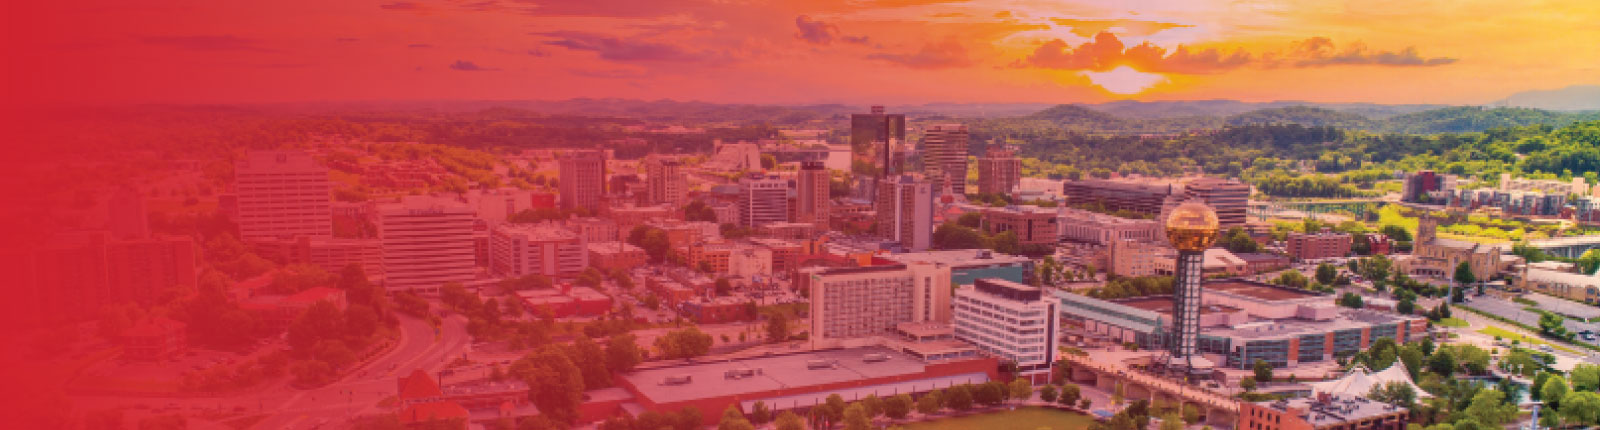 Knoxville skyline revlocal marketing